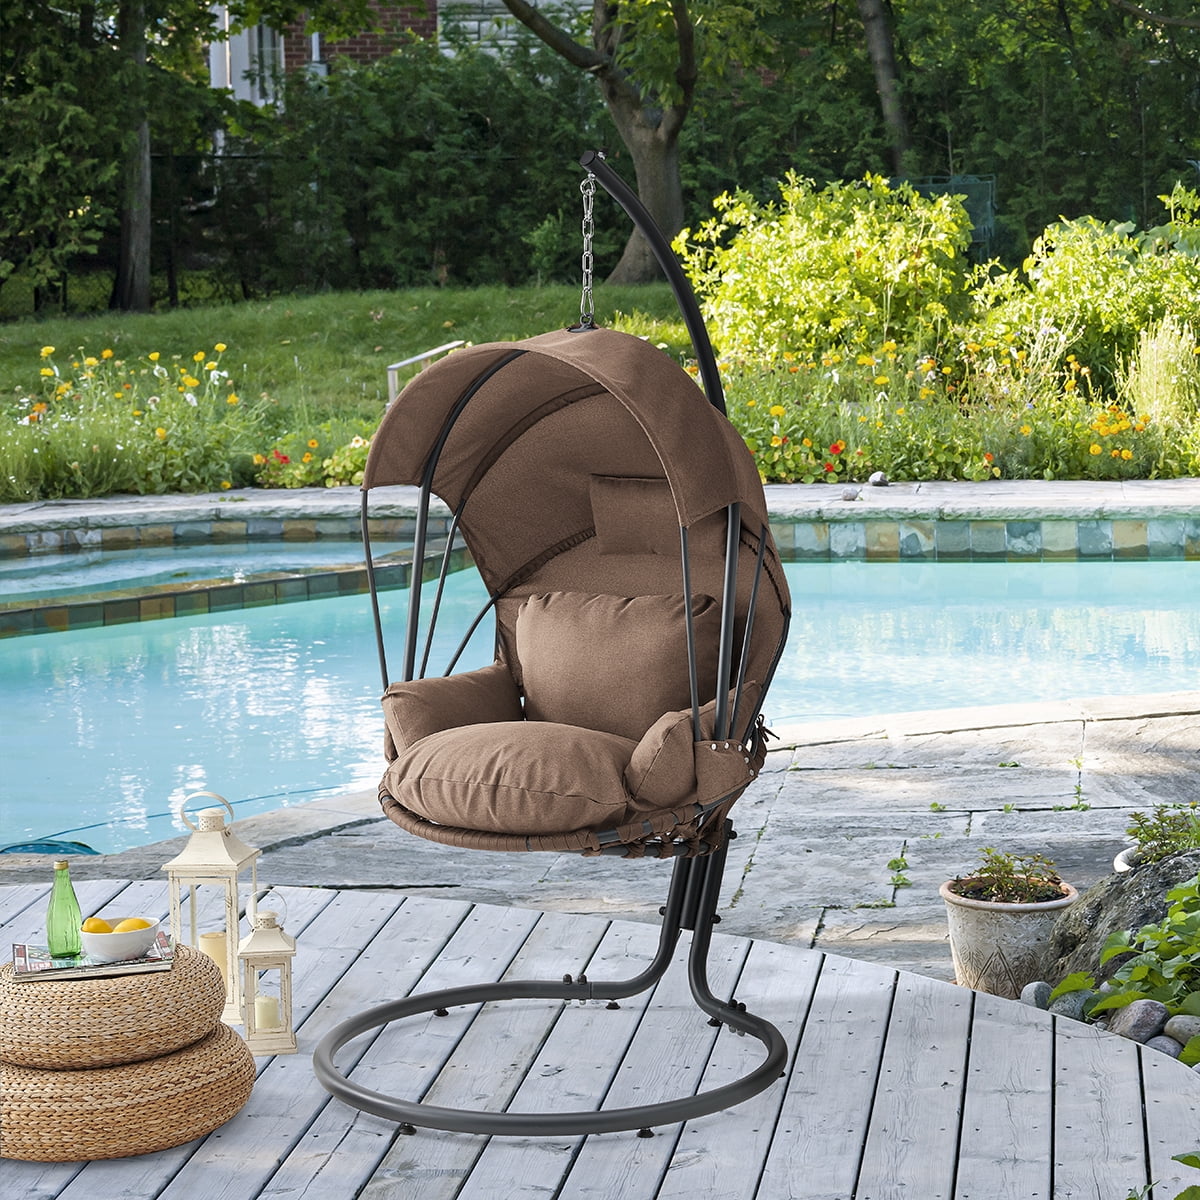 Hanging Egg Chair Cushion & Pillow Outdoor Porch Garden Swing Chair Padded Seat 